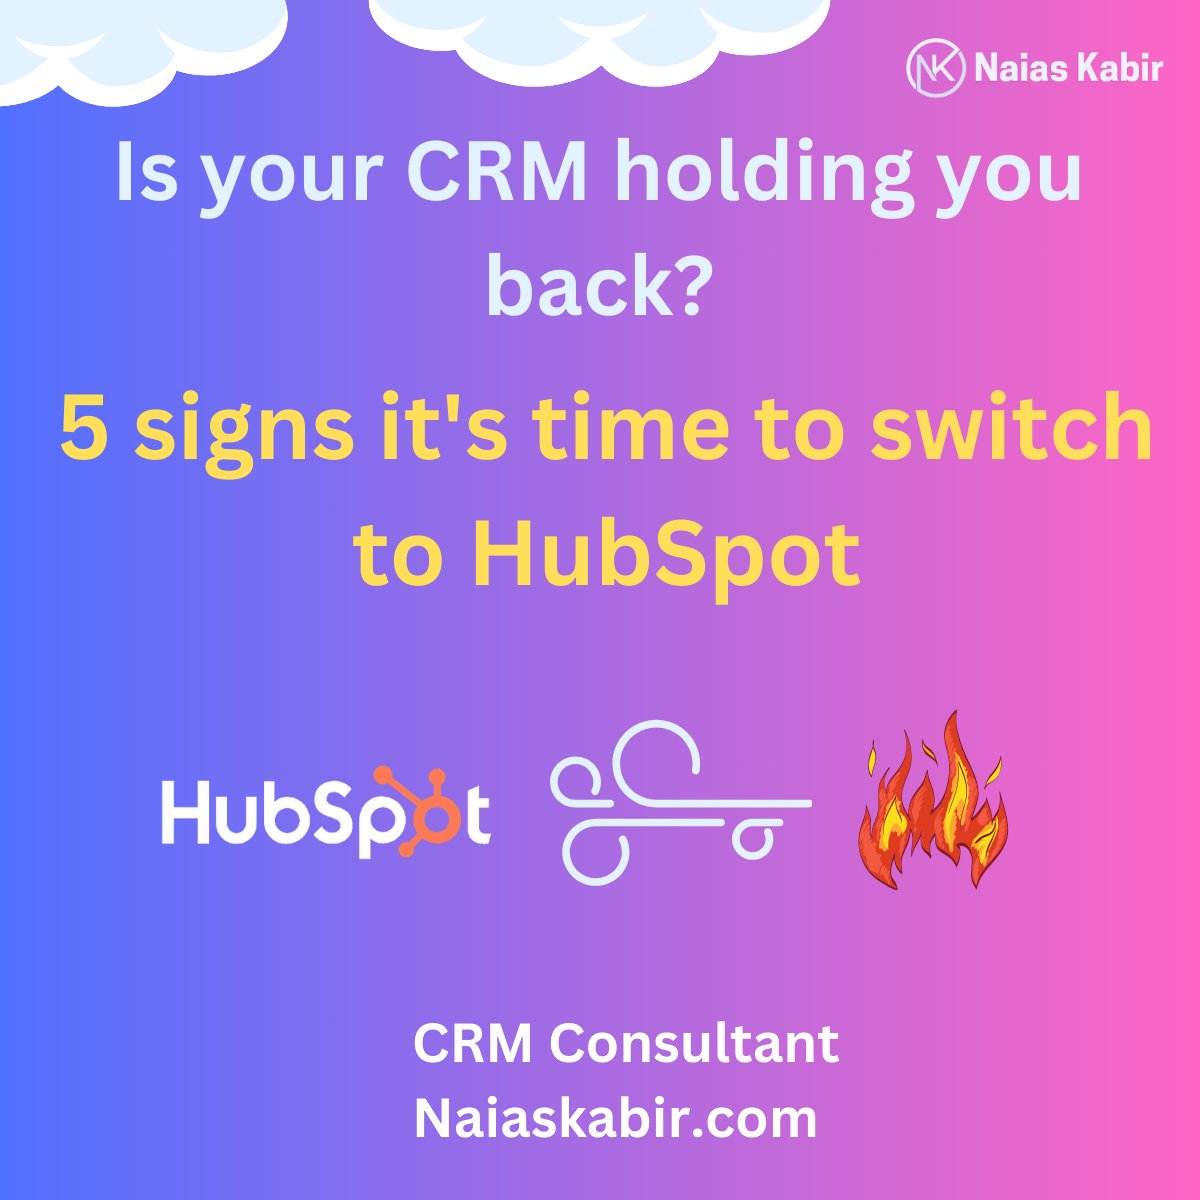 Five signs that suggest a shift to HubSpot for a better productivity in your CRM system. These include centralizing data, automating manual tasks, guiding lost leads to conversion, providing clear insights in data reports, and fueling growth.
#Microwaveovenrepair #Windowsupplier